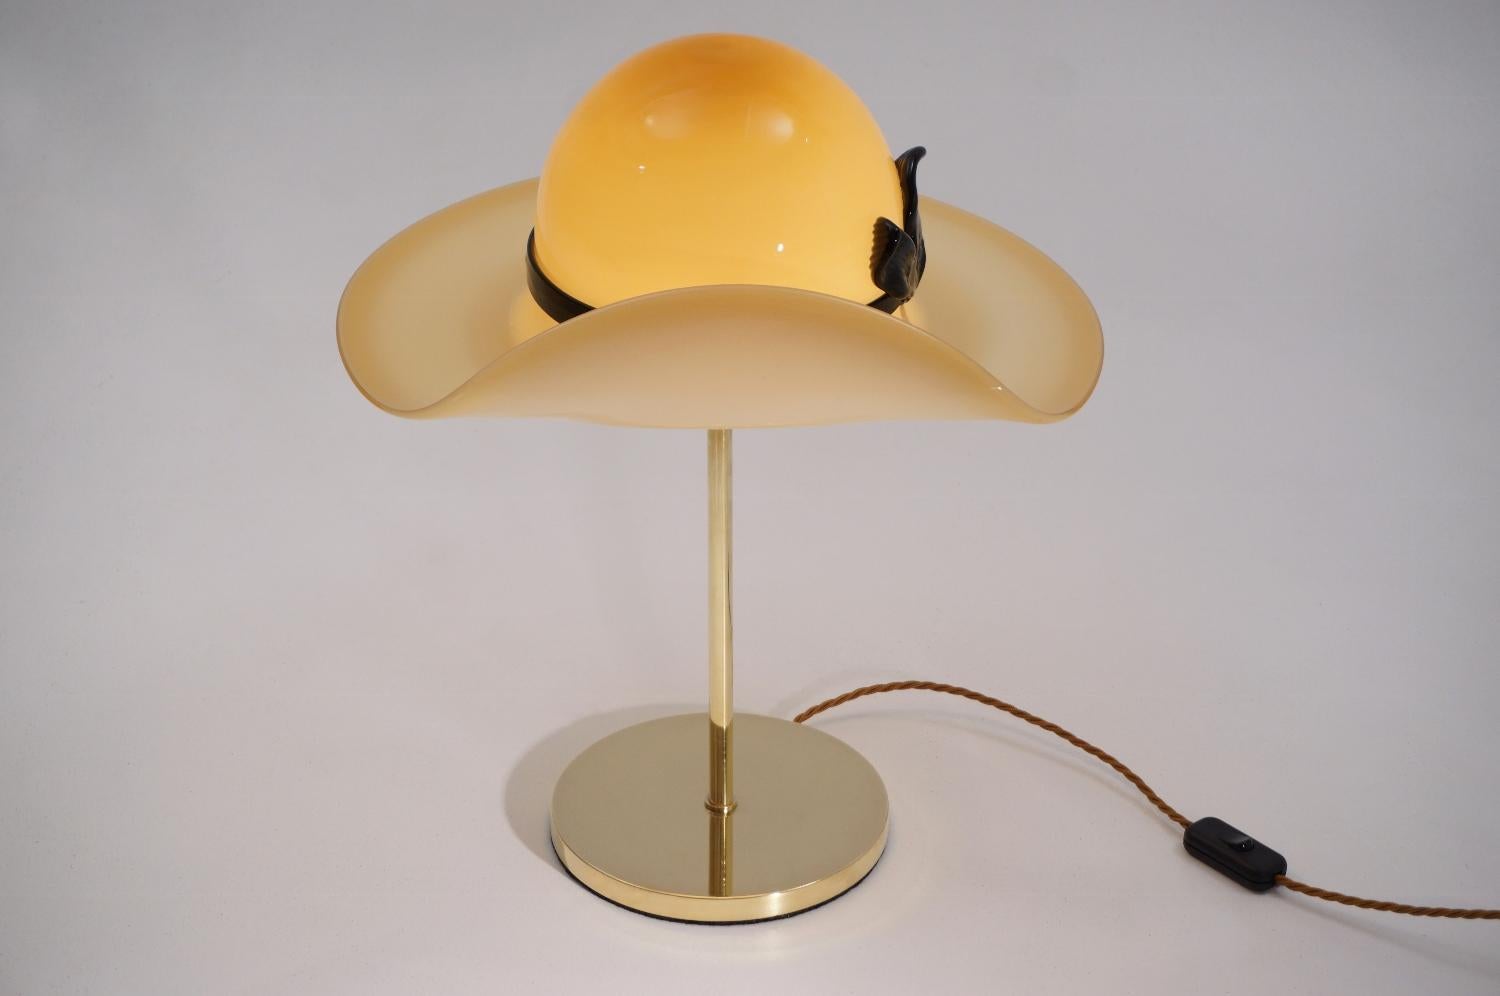 Venini Murano glass hat lamp on a brass base, circa 1970s, Italian.

This table lamp has been gently cleaned while respecting the vintage patina. It is newly rewired & earthed, fully working and PAT tested by an electrician. It has a new E 14